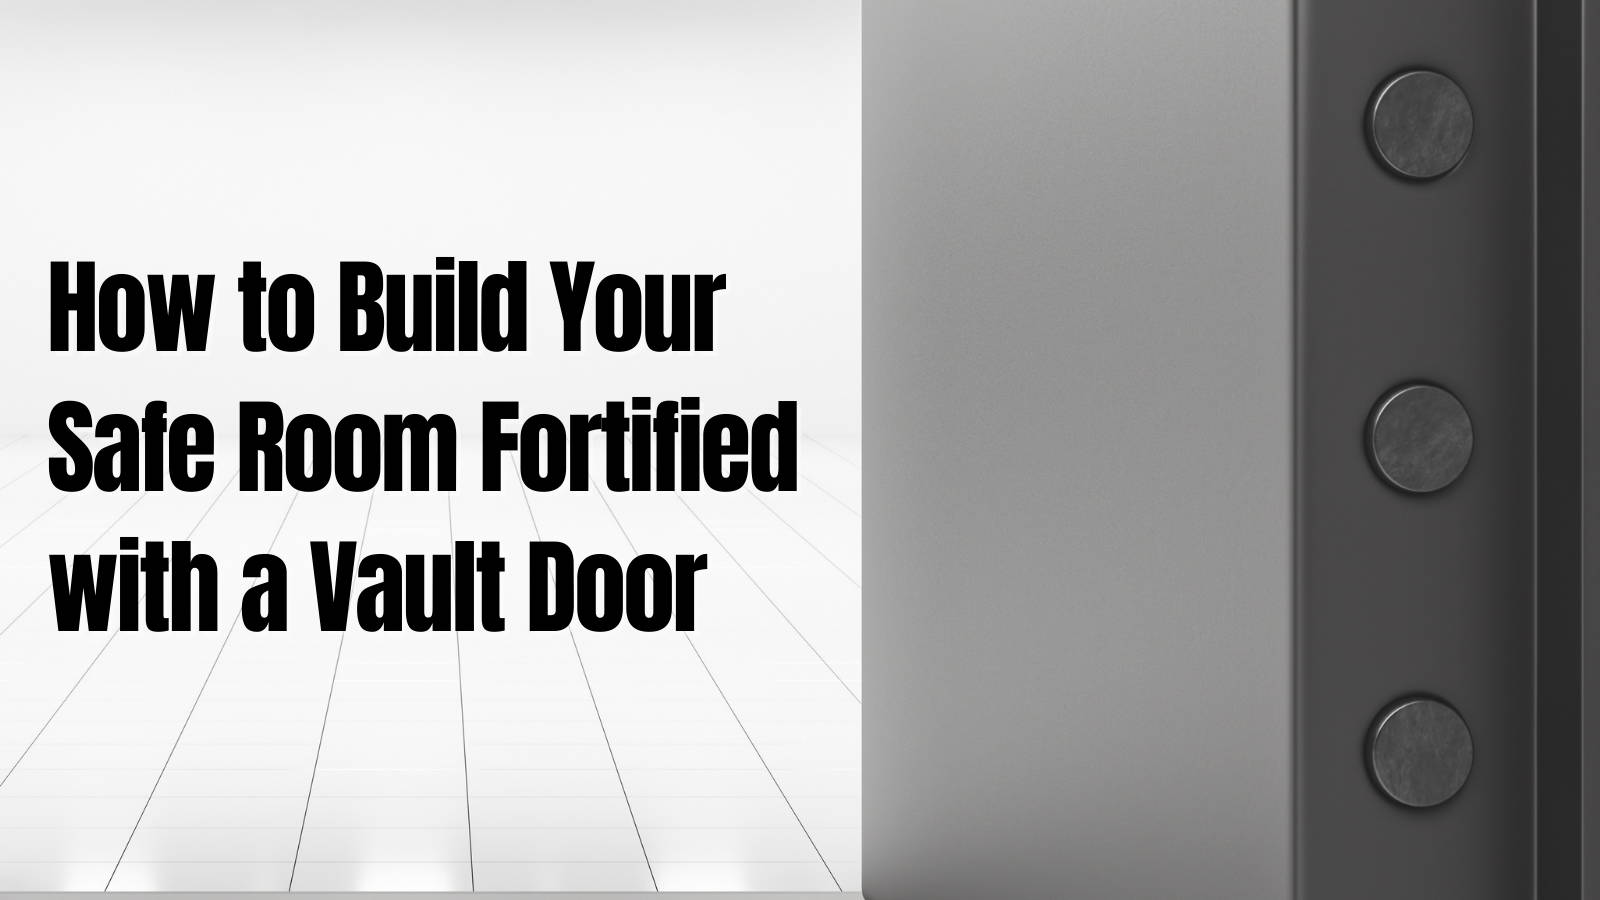 How to Build Your Safe Room Fortified with a Vault Door